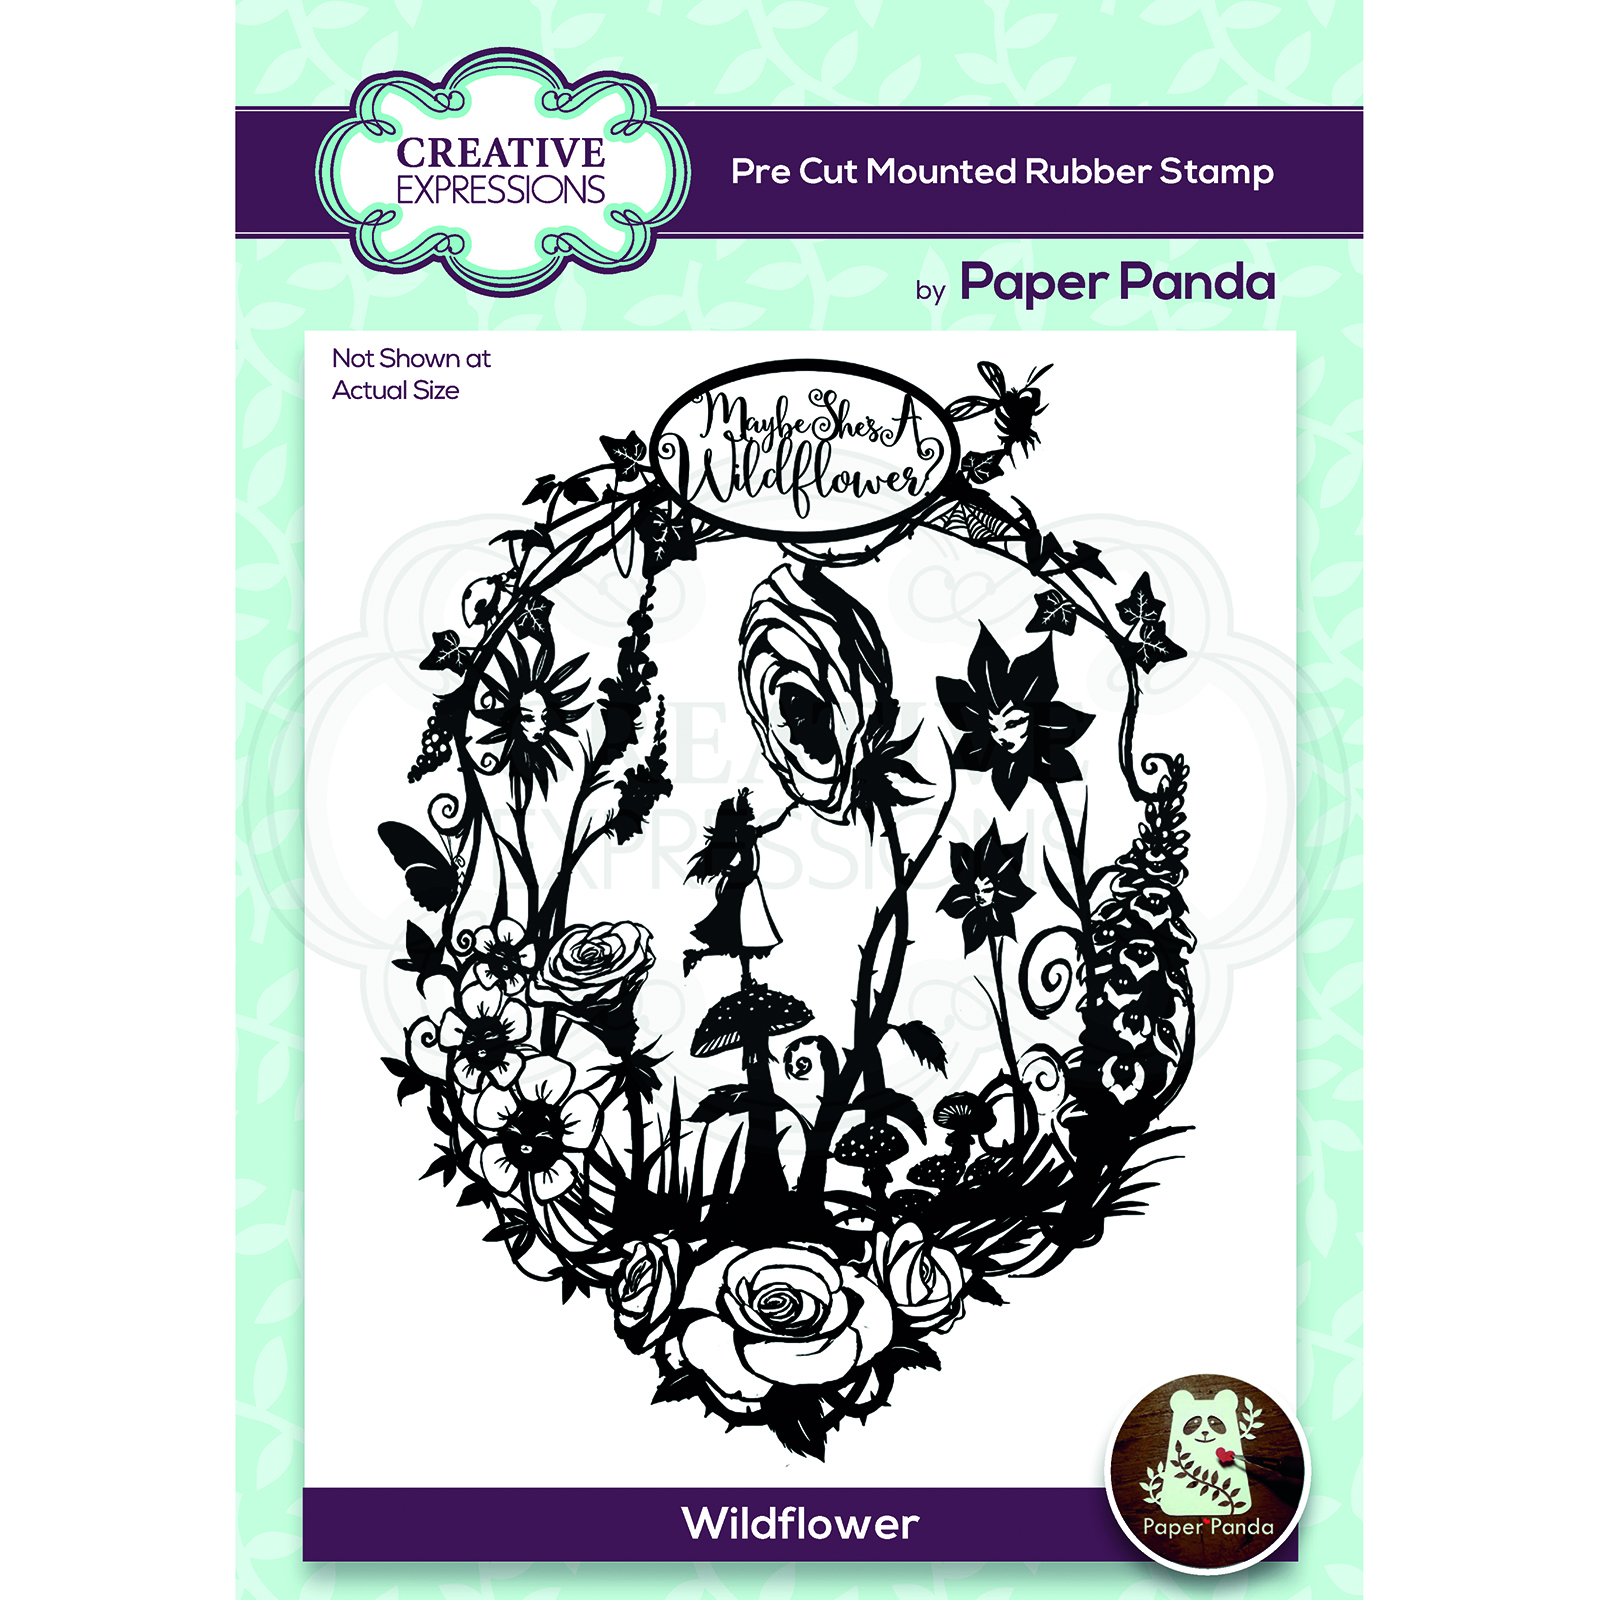 Creative Expressions • Paper panda pre cut mounted rubber stamp Wildflower